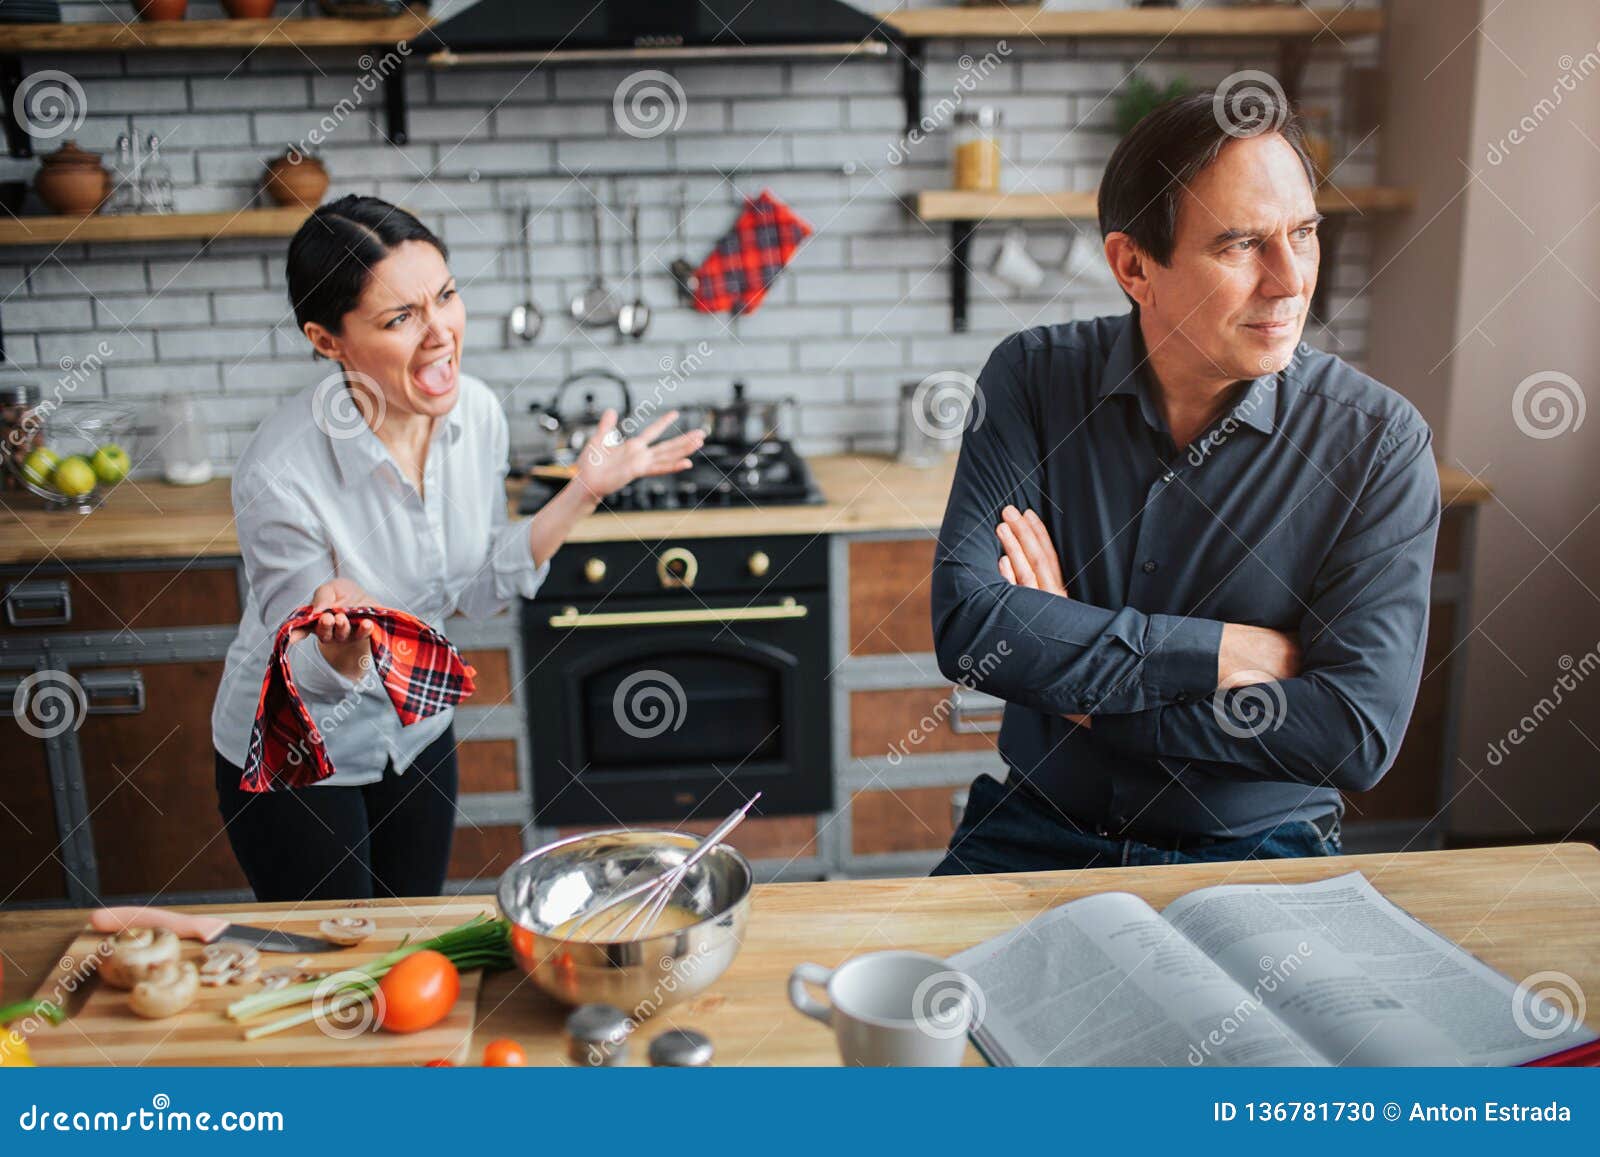 couple in kitchen. theey have argue. guy doesn`t listen to woman. she try to talk to him. they are upset and unhappy.